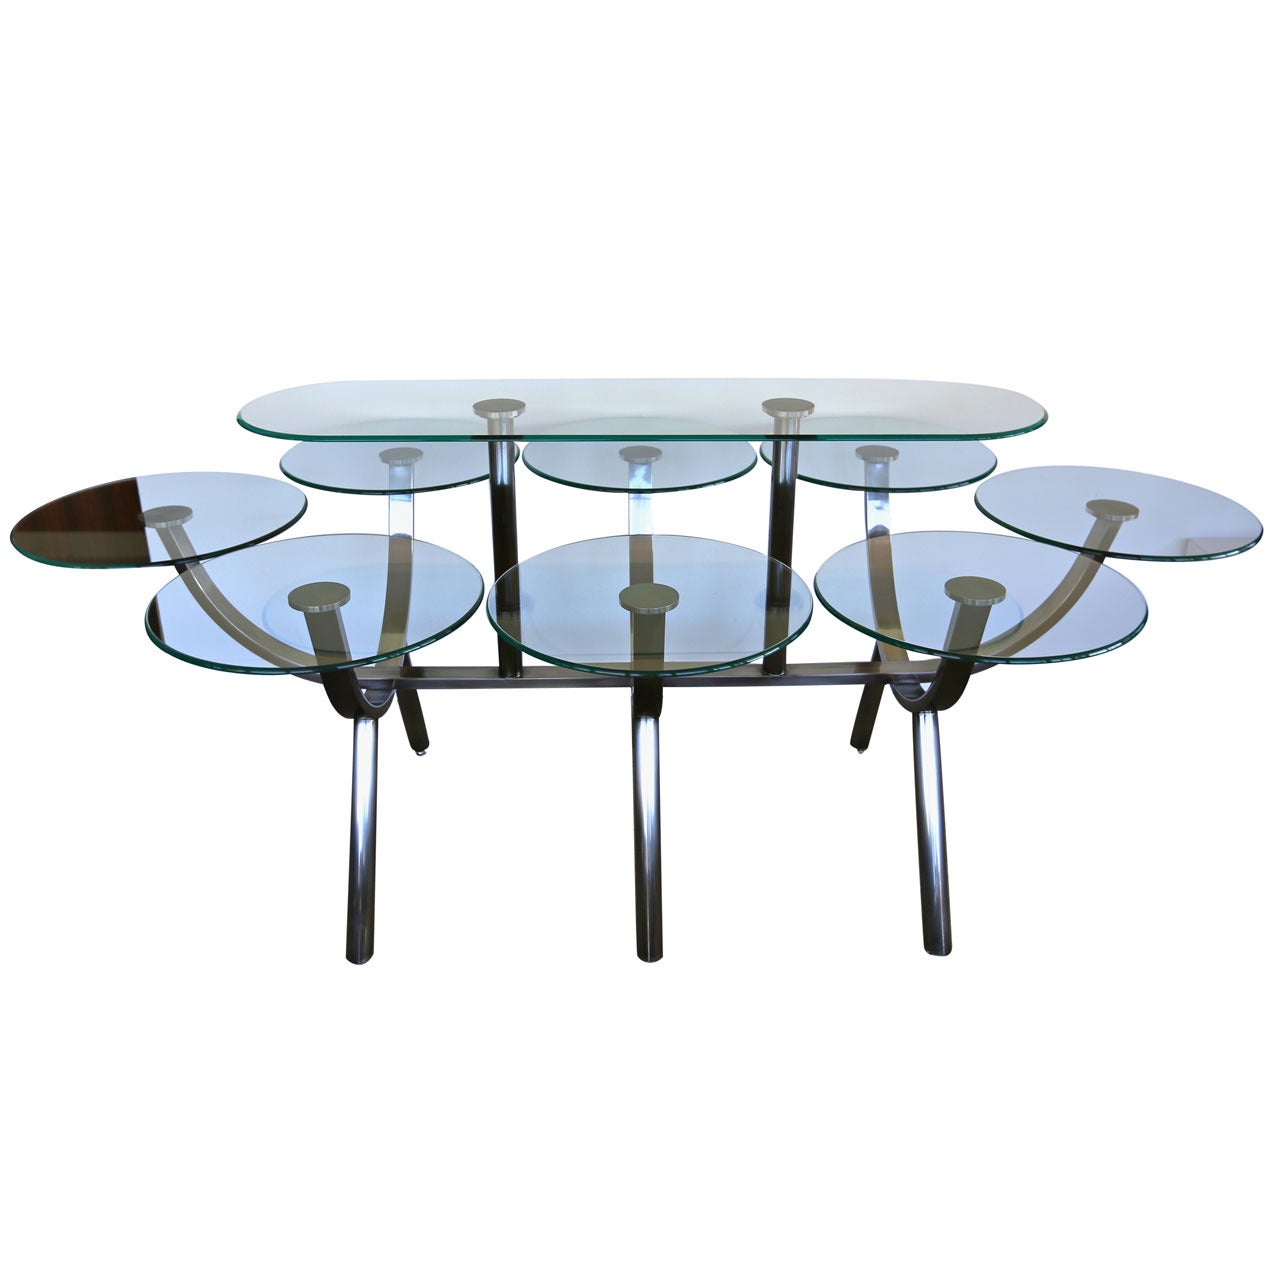 "Circle of Life" Dining Table by Design Institute of America (DIA)